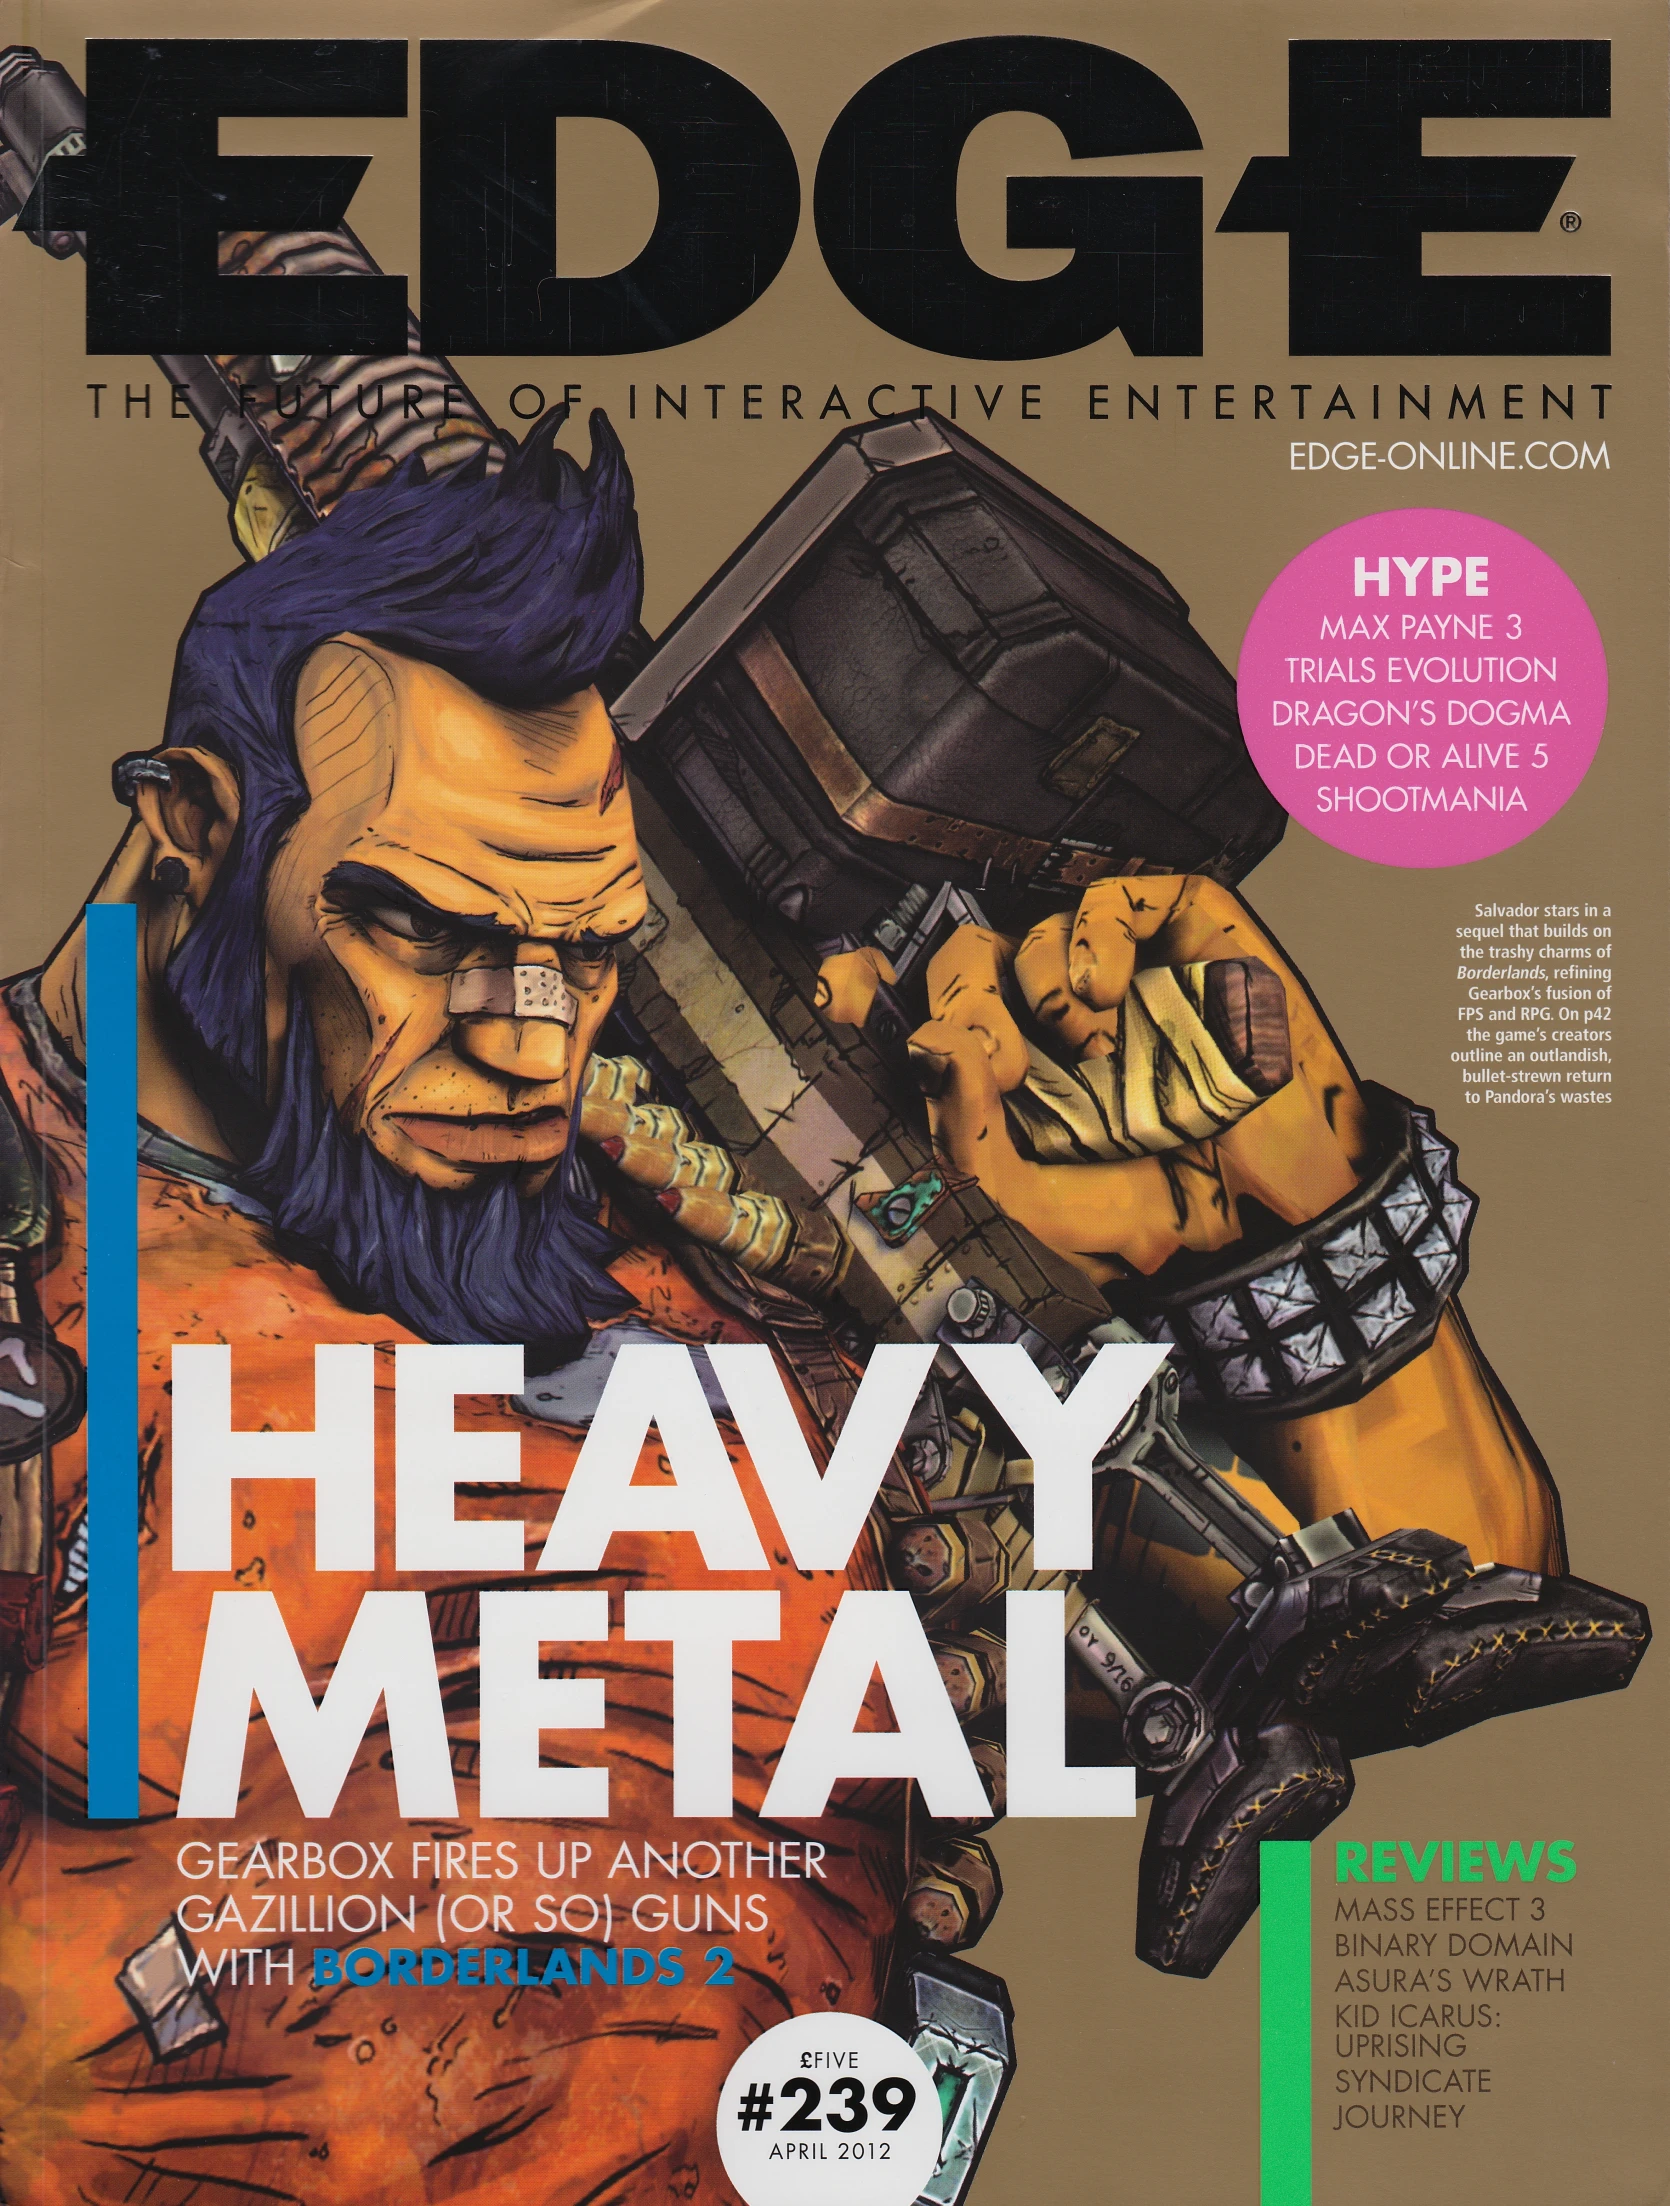 the cover of edge magazine featuring heavy metal